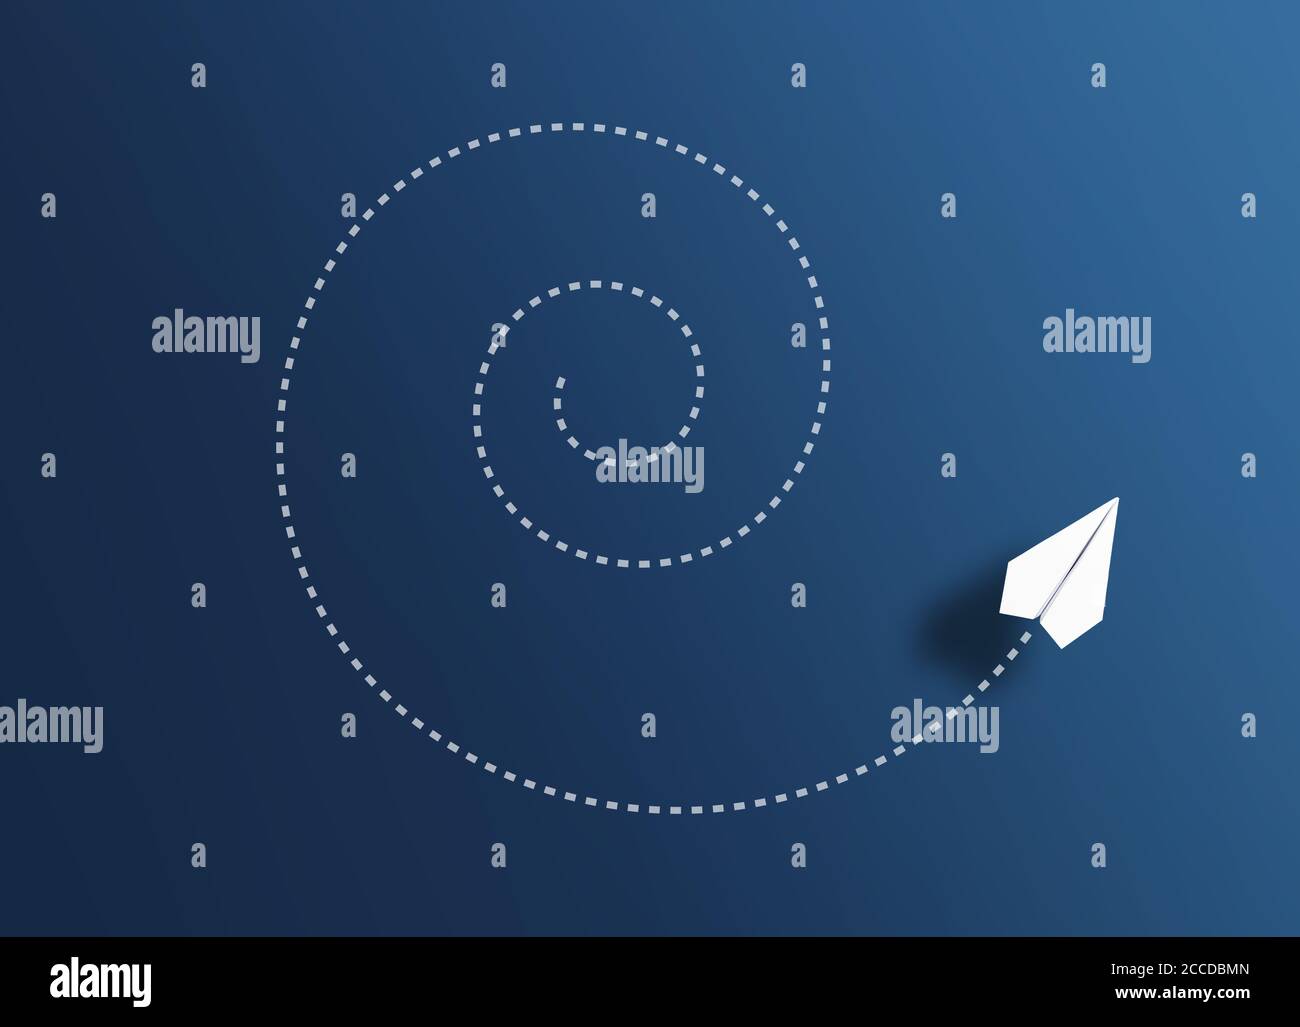 top view of paper plane flying spiral path against blue background, going around in circles concept Stock Photo